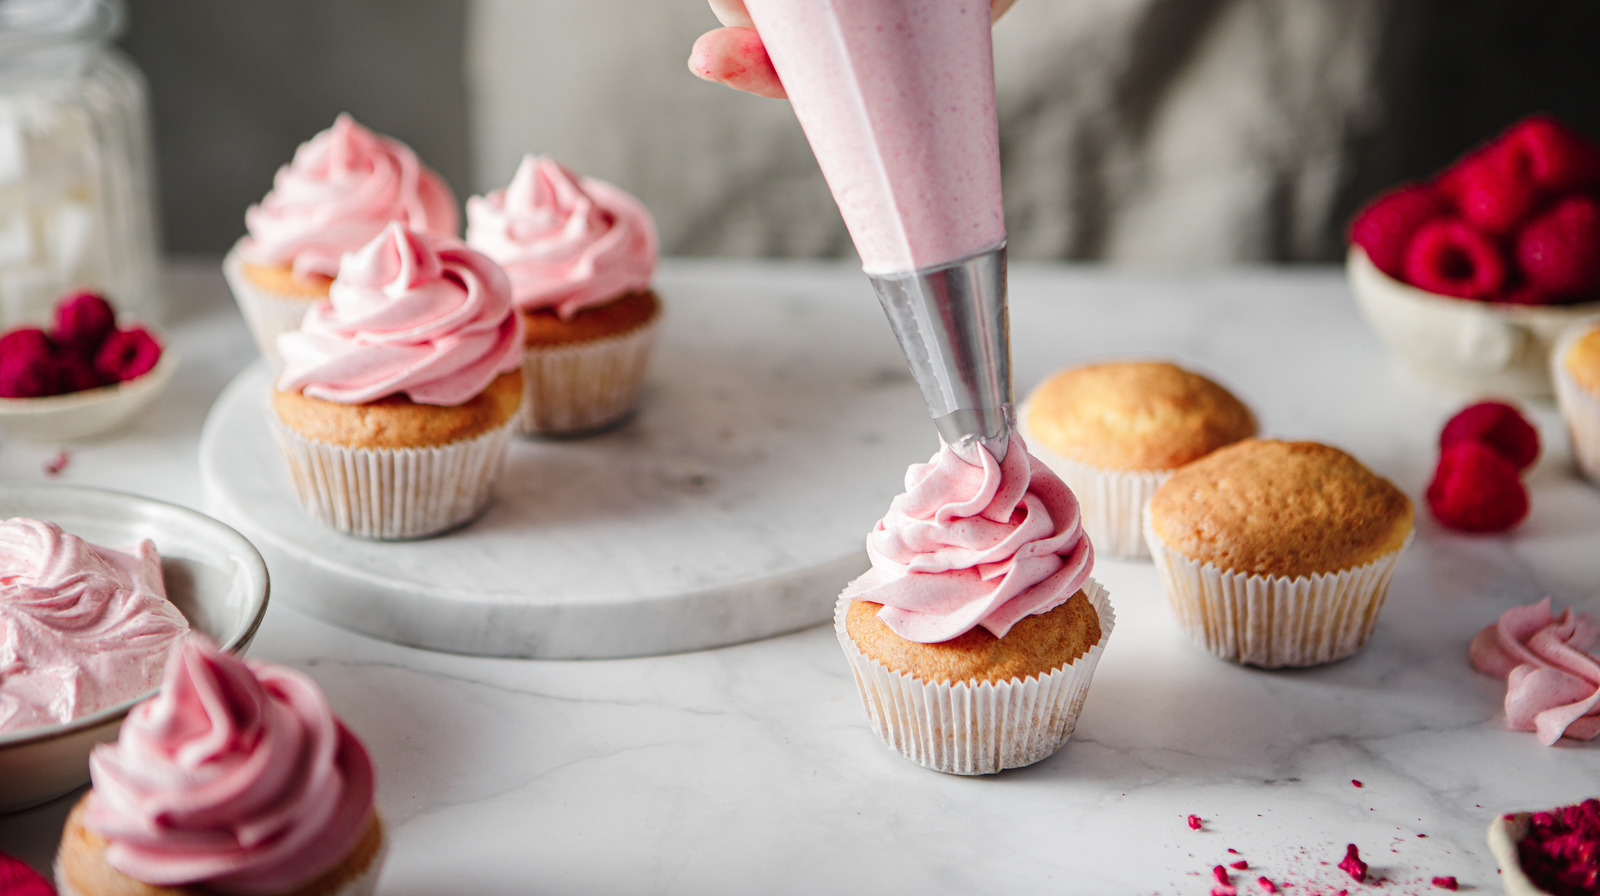 10 Tips You Need To Elevate Store-Bought Frosting - Tasting Table